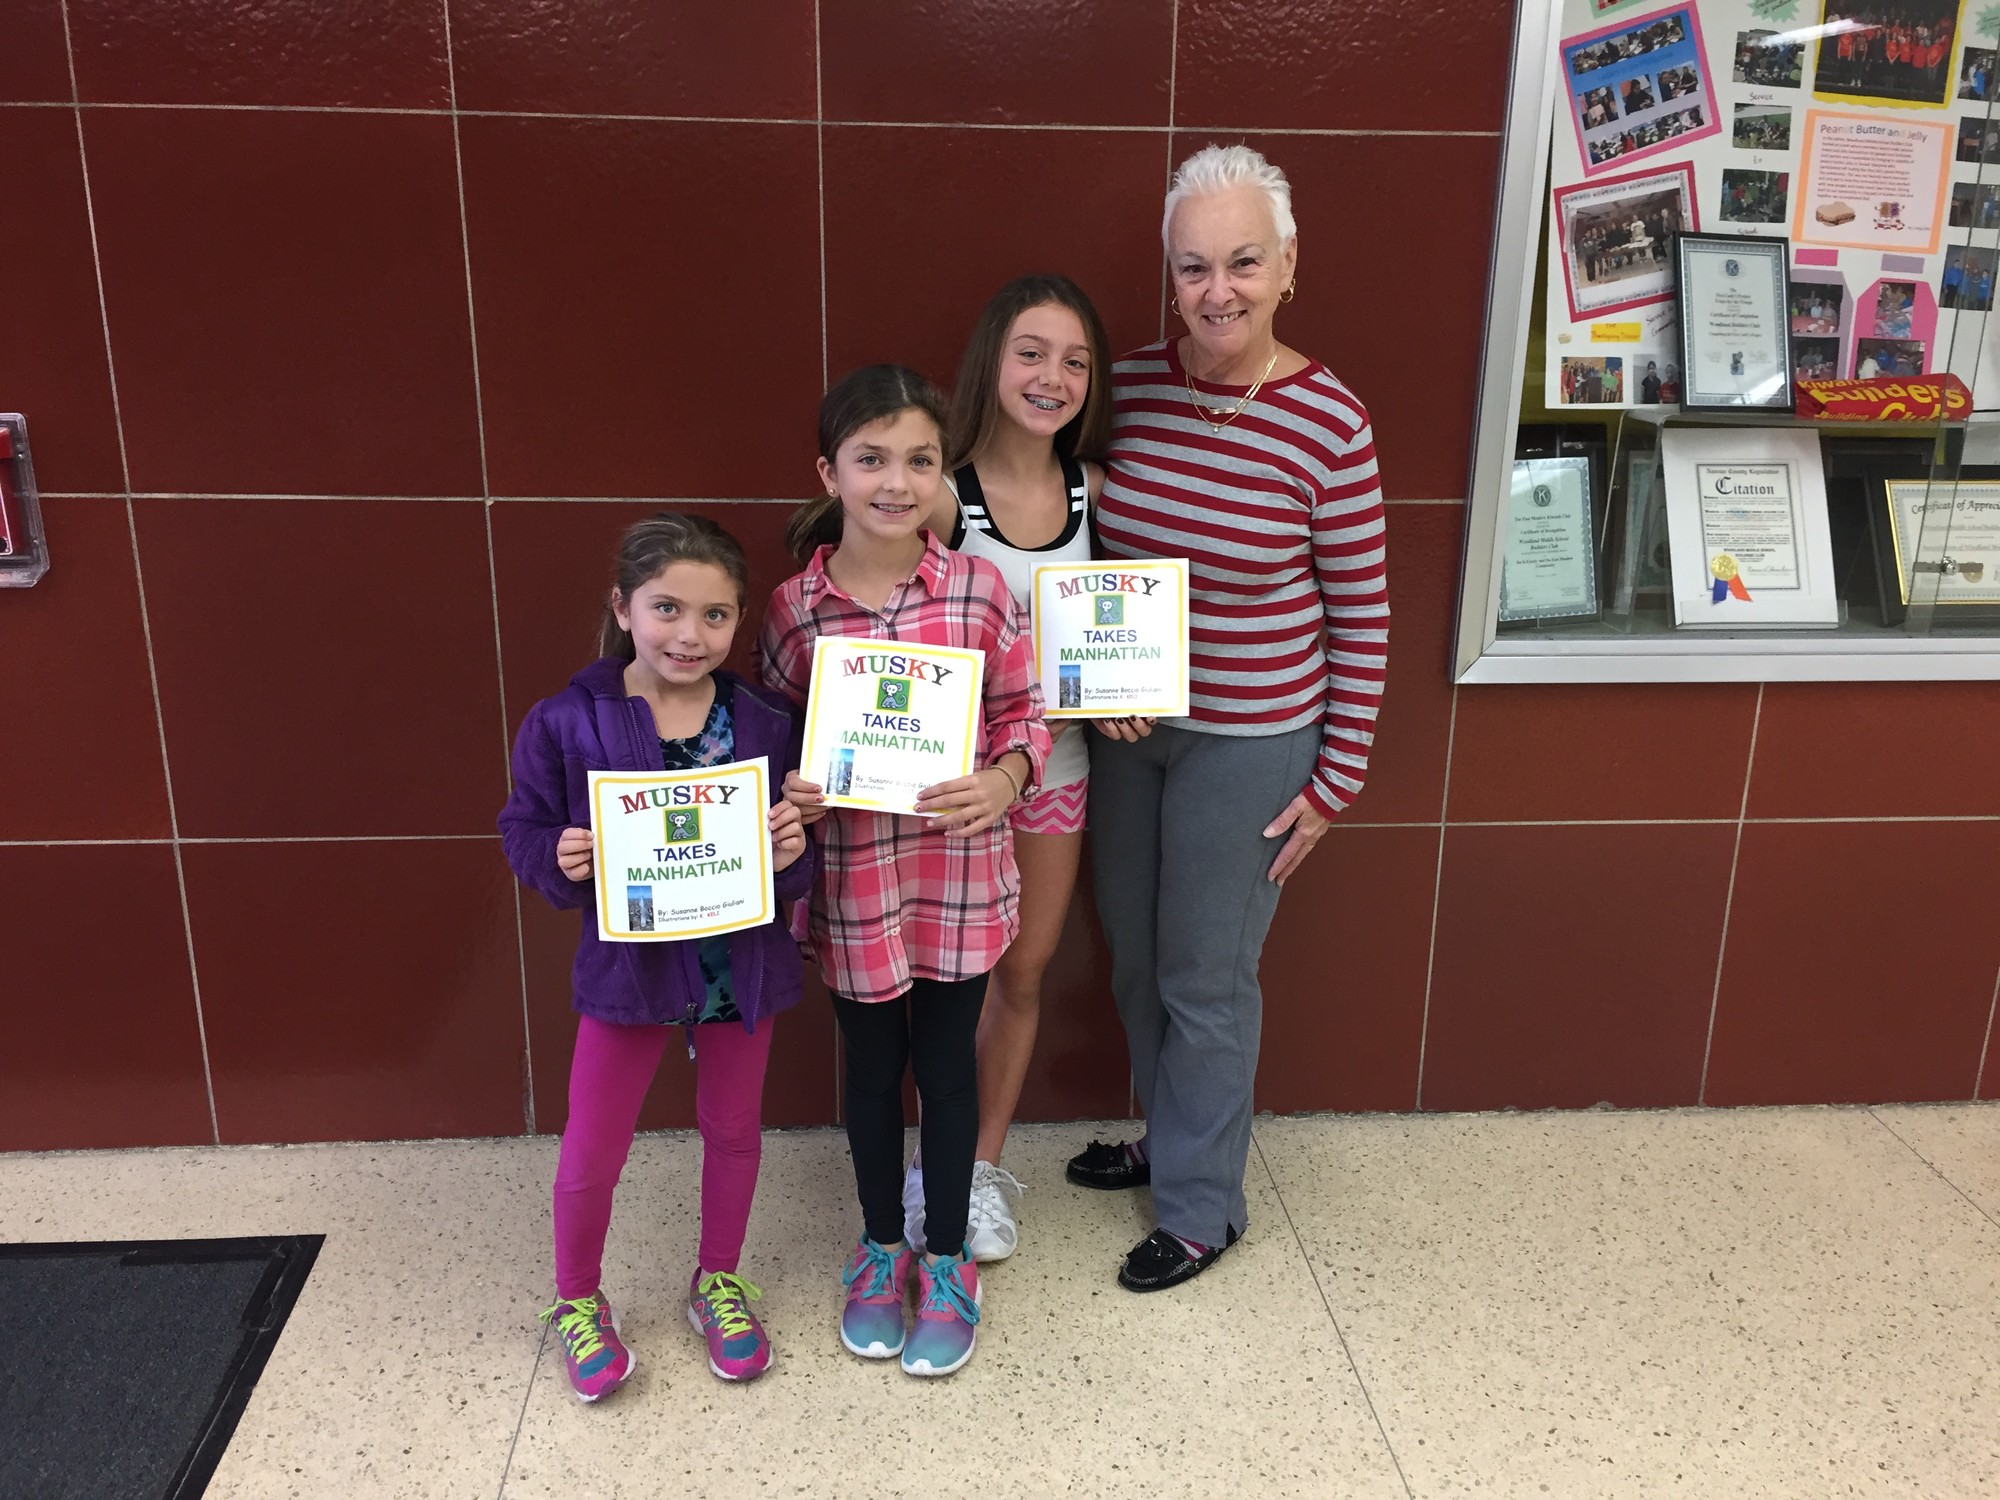 Susan Giuliani said her granddaughters, from left, Isabella, Lauren and Emily Stea,  helped illustrate her new book, “Musky Takes Manhattan.”